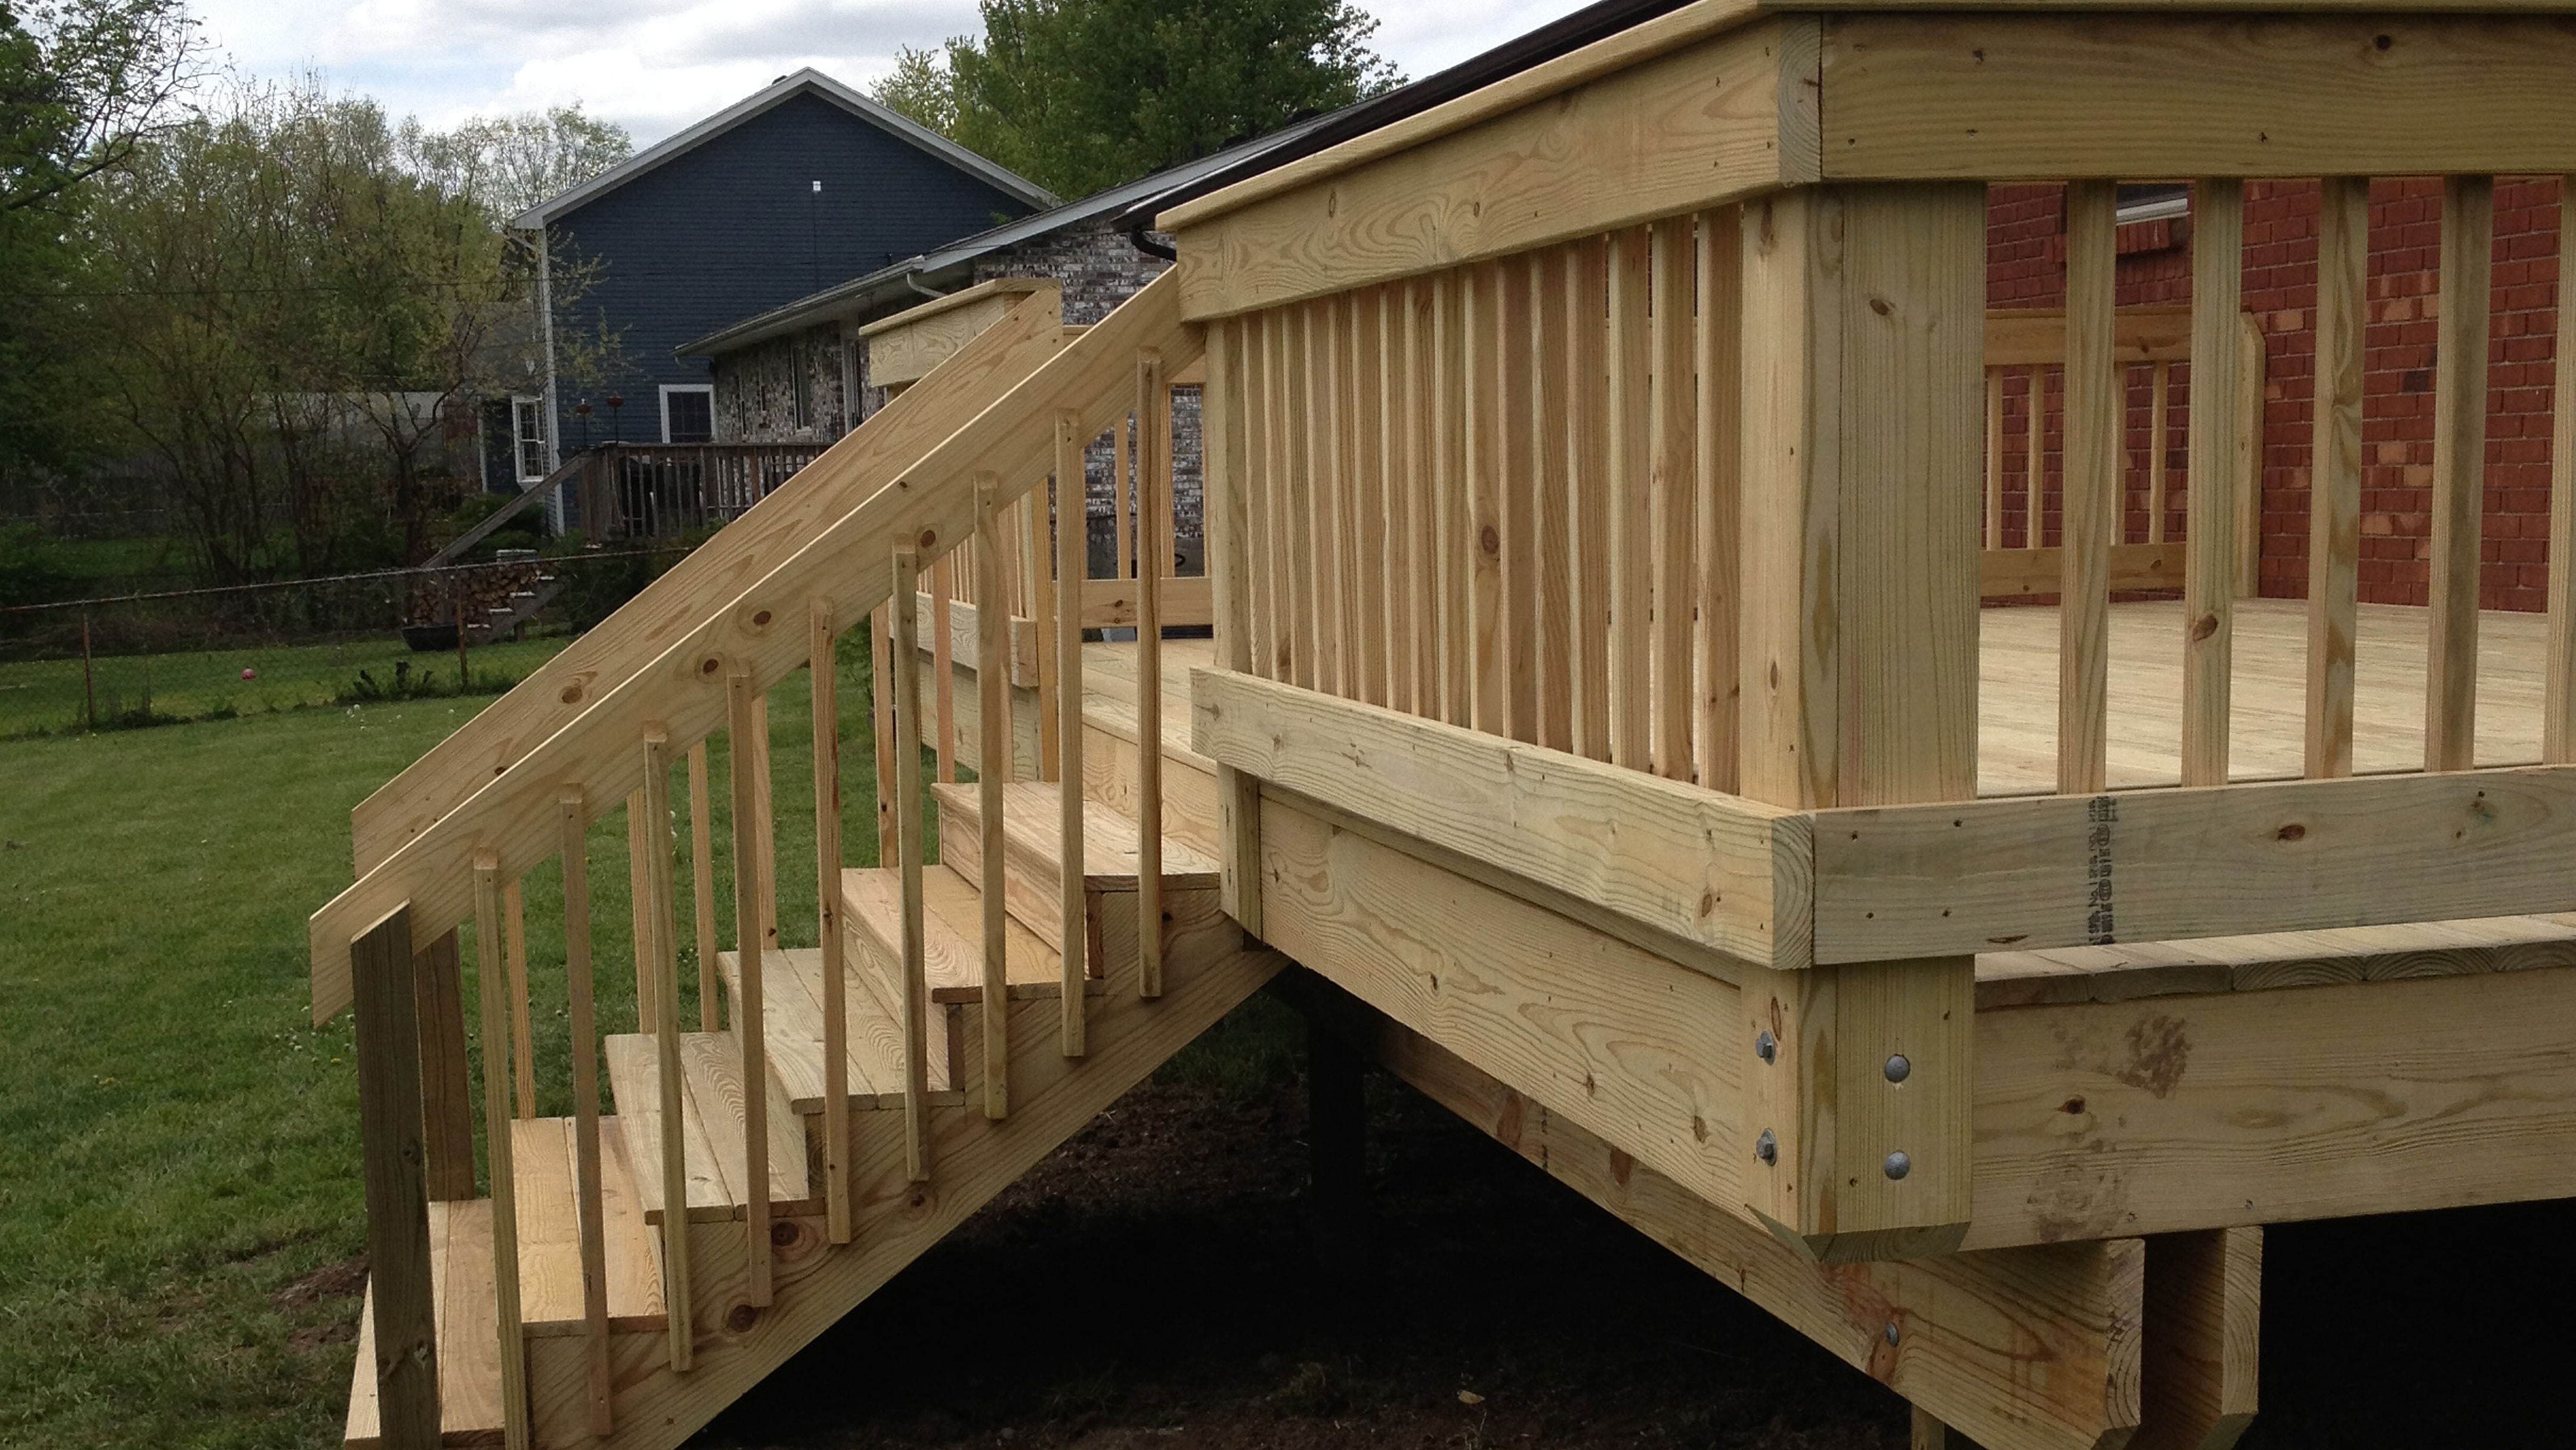 The 3 foot stairs that is included with the deck special